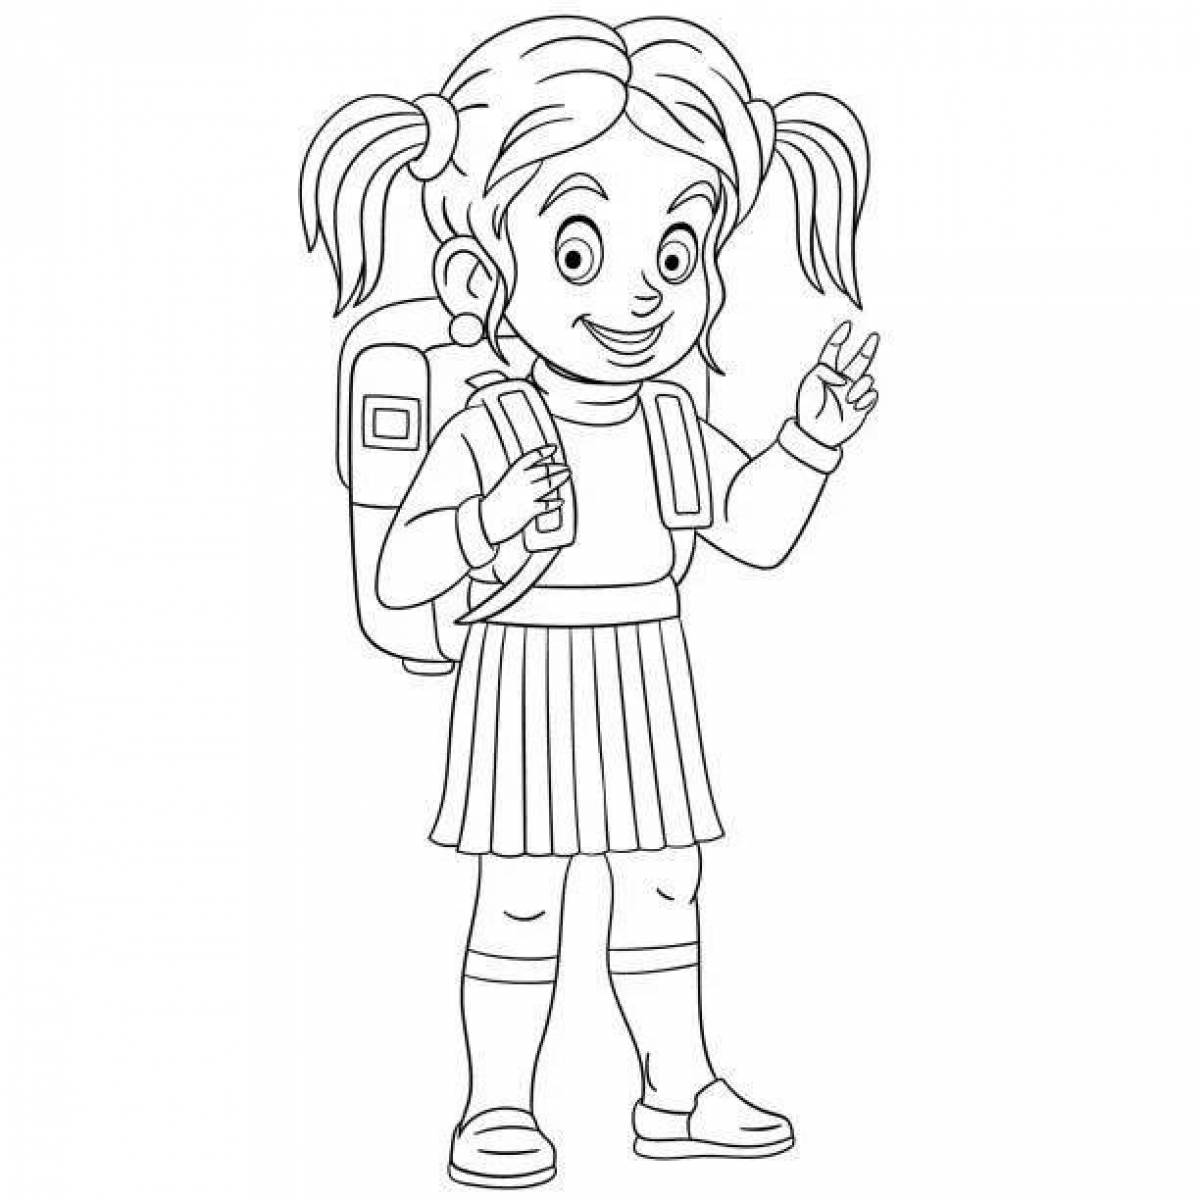 Animated schoolgirl coloring page